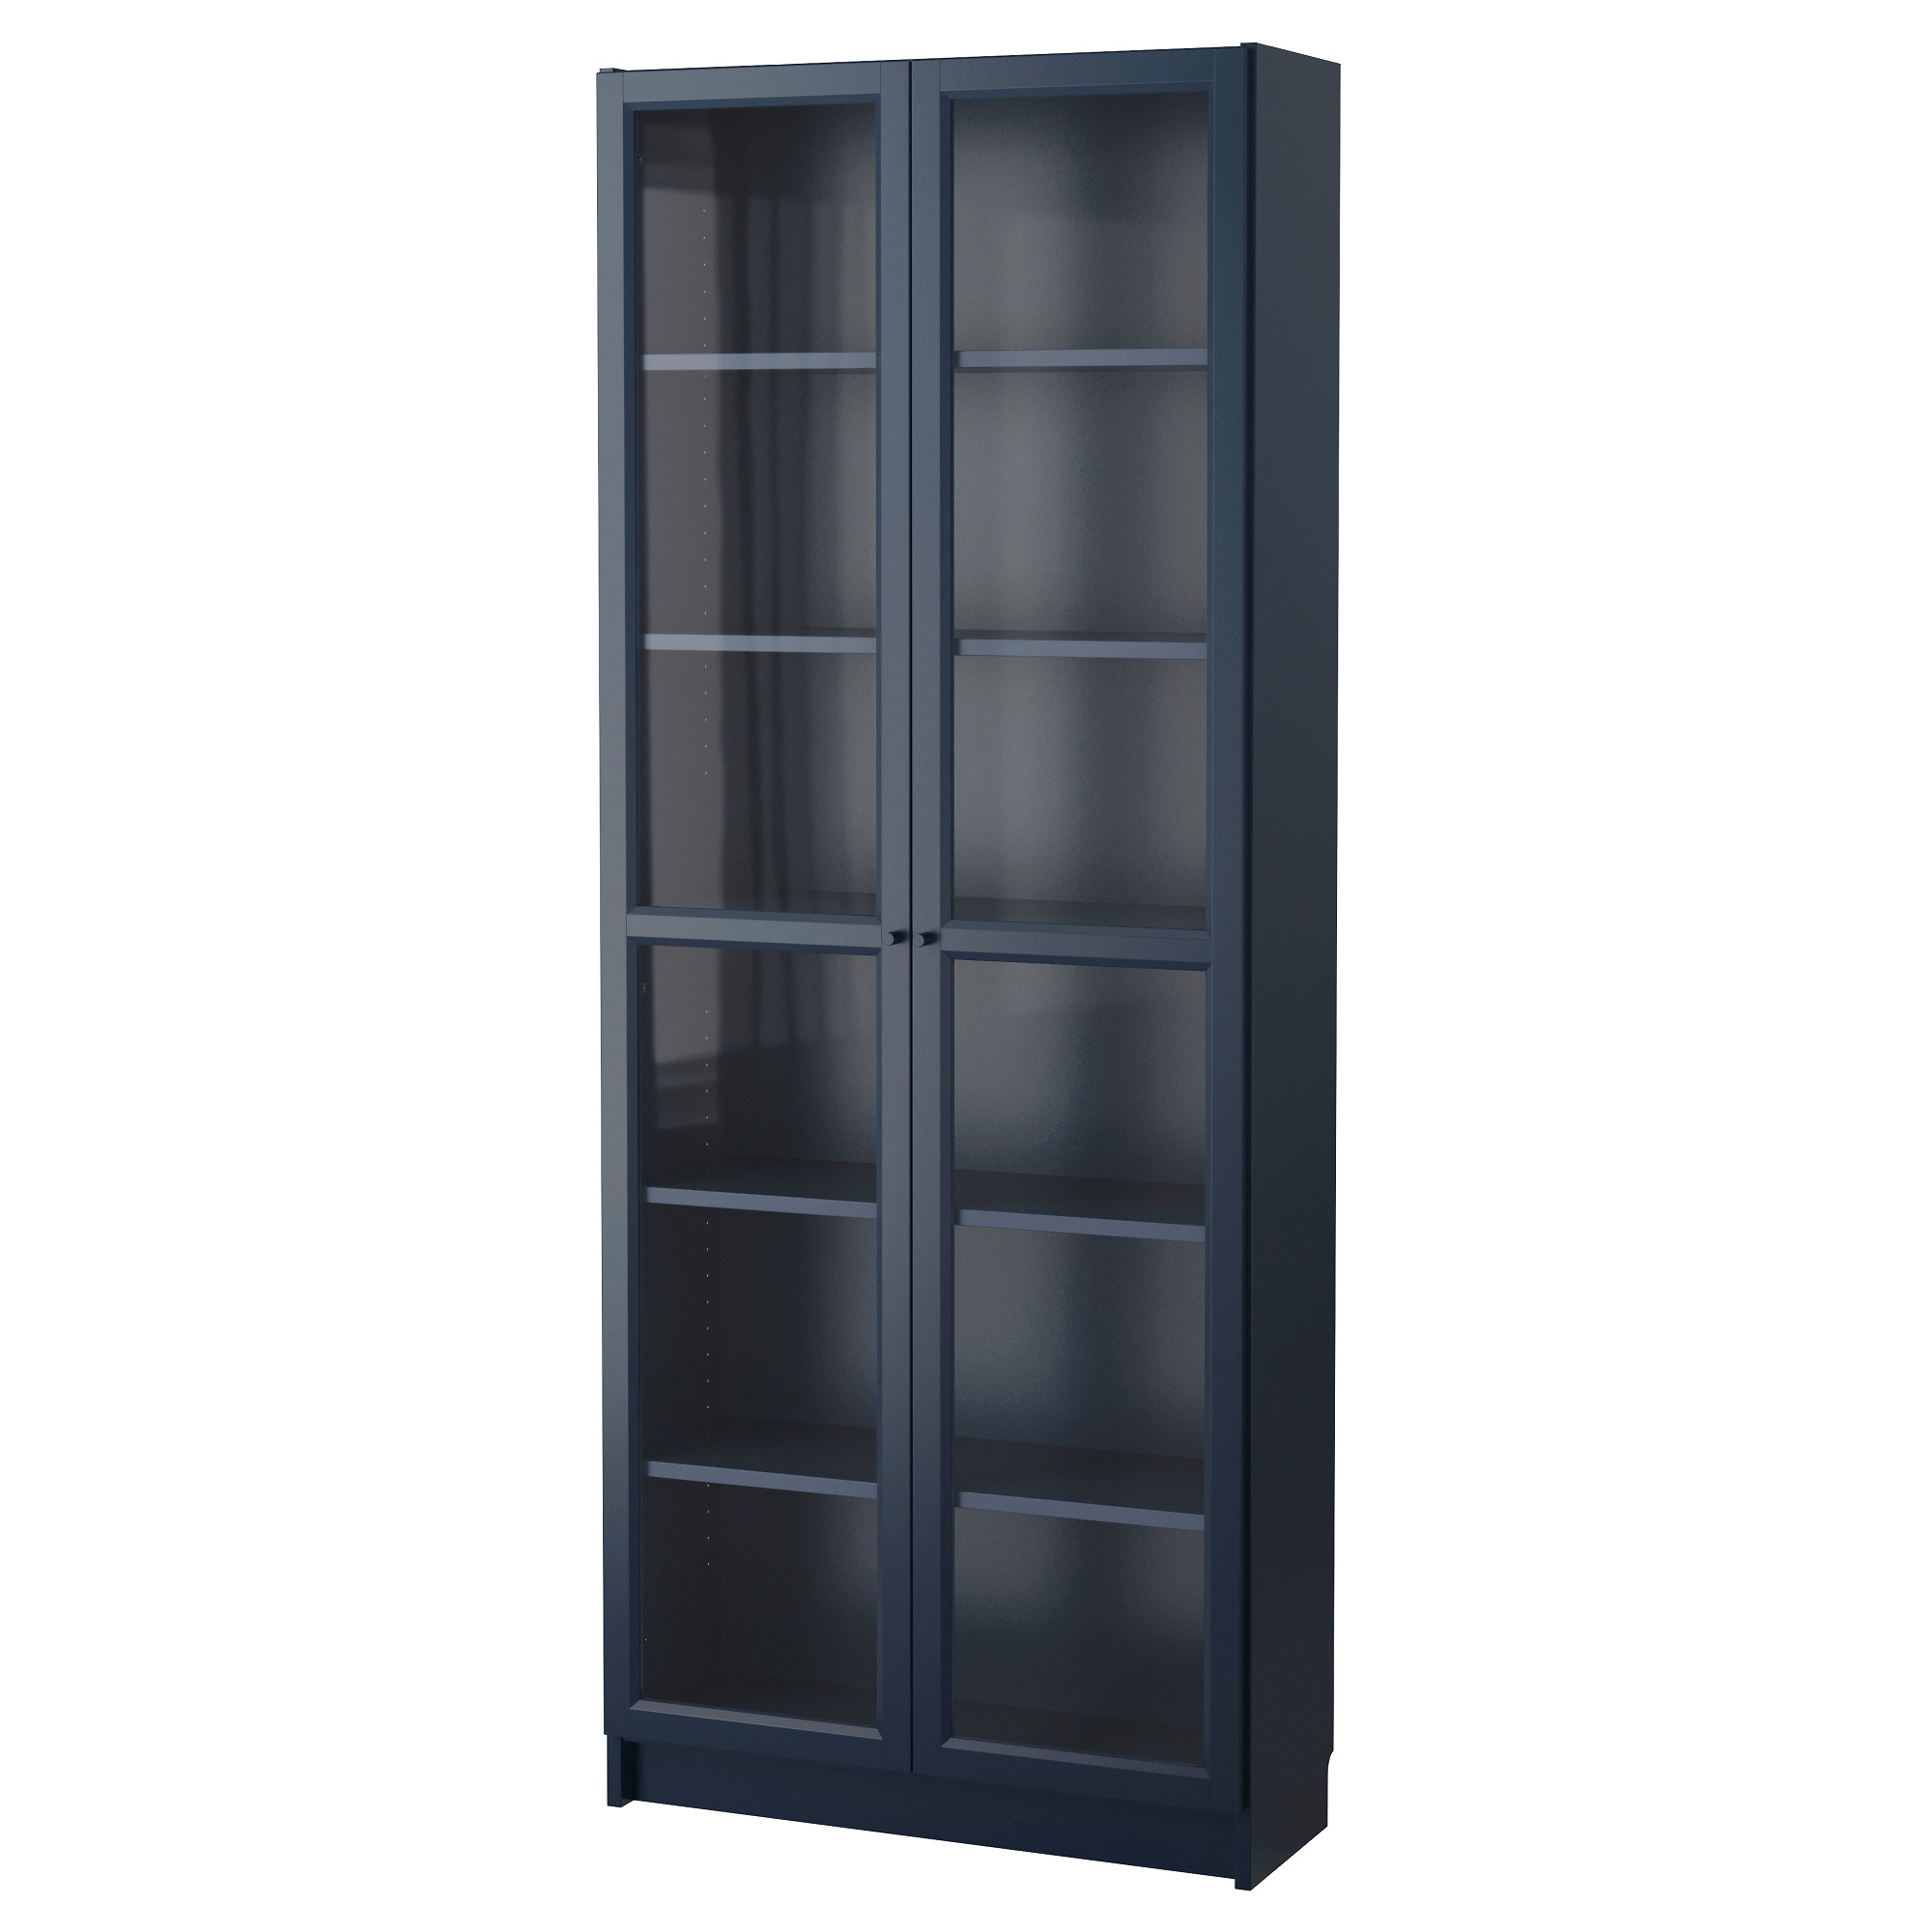 Unique BILLY bookcase with glass doors, dark blue Width: 31 1/2  2 shelf bookcase with glass doors